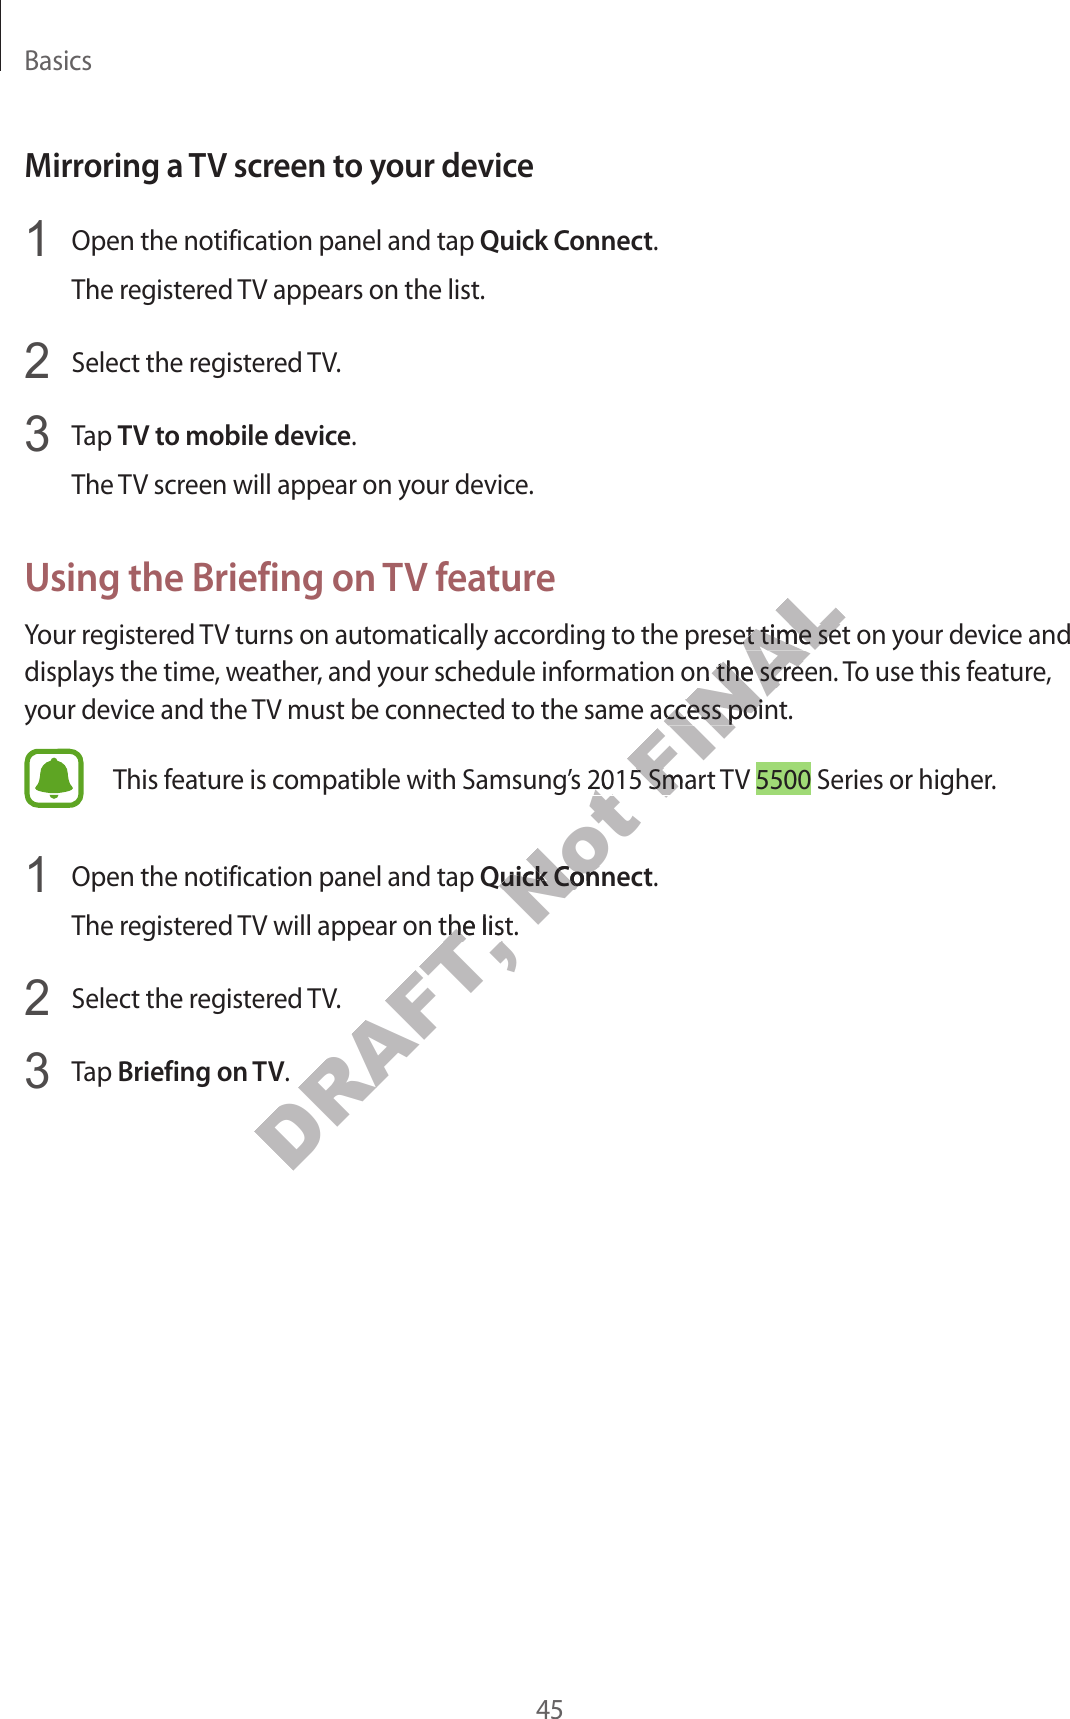 Basics45Mirroring a TV screen to your device Open the notification panel and tap Quick Connect.The registered TV appears on the list. Select the registered TV. Tap TV to mobile device.The TV screen will appear on your device.Using the Briefing on TV featureYour registered TV turns on automatically according to the preset time set on your device and displays the time, weather, and your schedule information on the screen. To use this feature, your device and the TV must be connected to the same access point.This feature is compatible with Samsung’s 2015 Smart TV 5500 Series or higher. Open the notification panel and tap Quick Connect.The registered TV will appear on the list. Select the registered TV. Tap Briefing on TV.DRAFT, V will appear on the list.V will appear on the listNot ’s 2015 Smar’s 2015 SmarNot Quick ConnecQuick ConnecFINALeset time set on yeset time set on ytion on the screen. tion on the screen. o the same access poino the same access poins 2015 Smars 2015 Smar